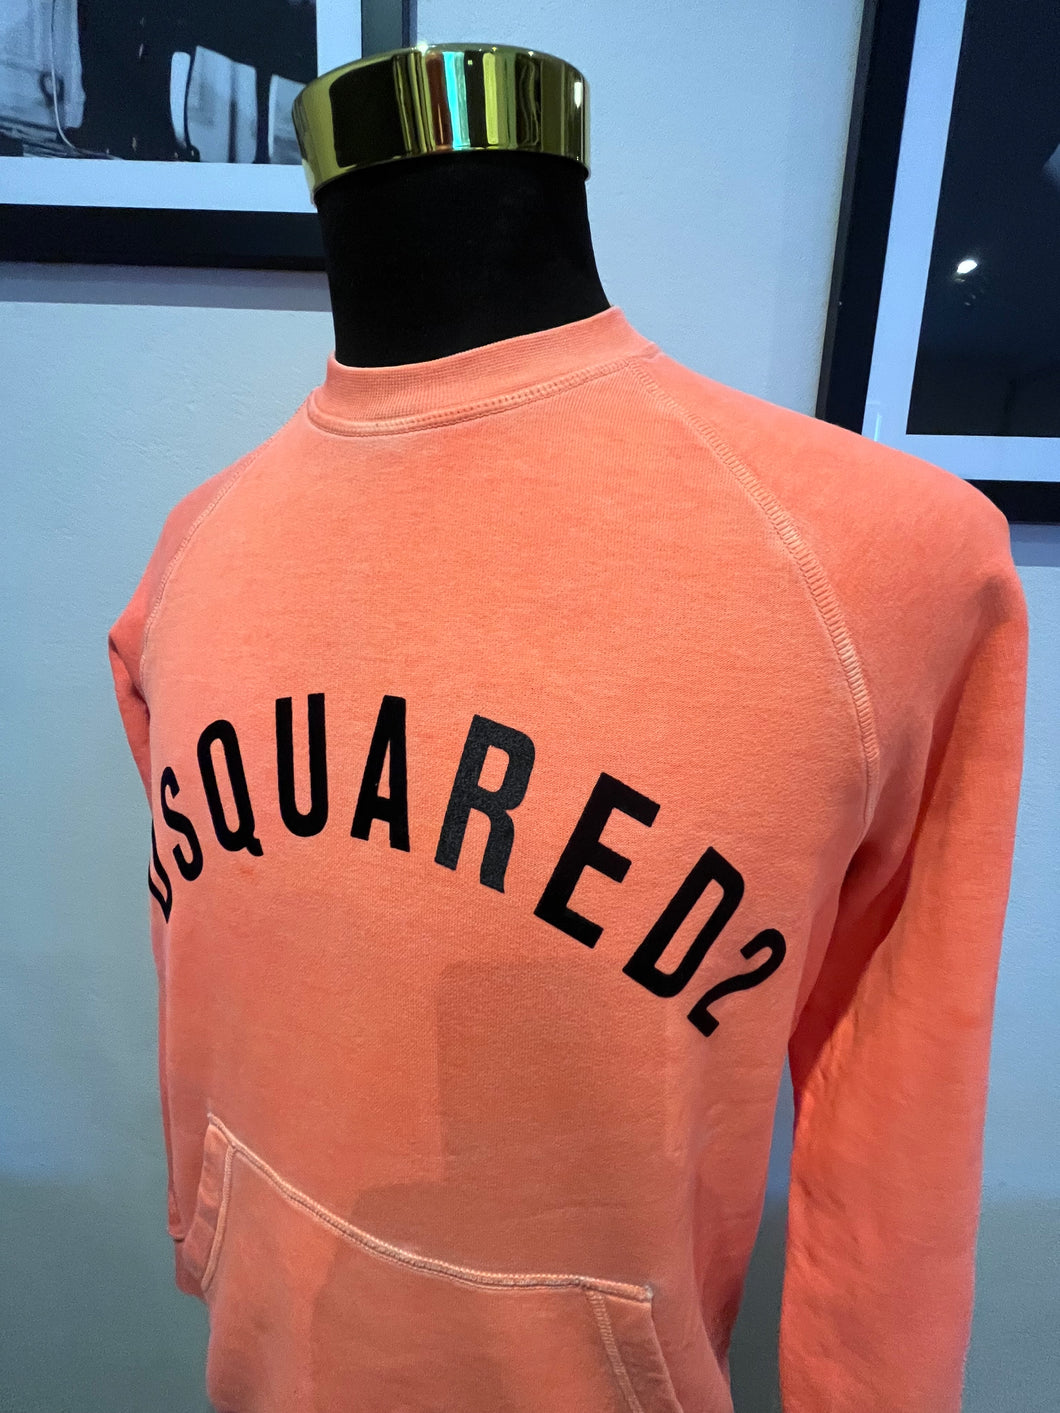 Dsquared2 100% Cotton Orange Sweater Size Small with Front Pocket Made in Italy